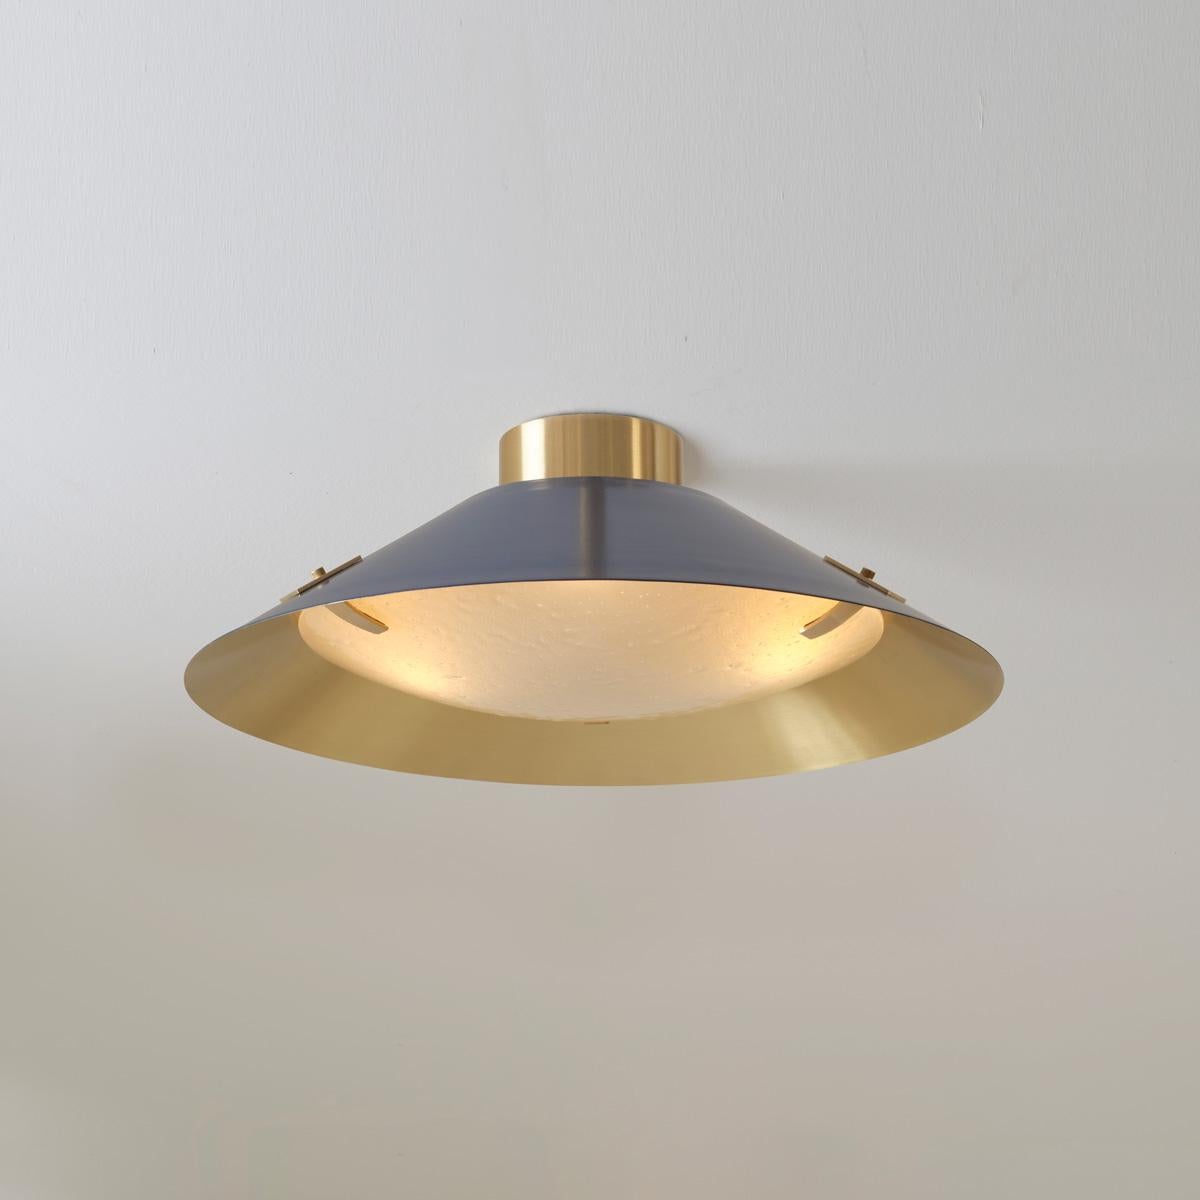 The Kono ceiling light is inspired by time tested shapes and lines but has a touch of organic modern via the incorporation of our signature Murano Bubble glass. With a mix of classic and contemporary, a two-tone shade with many color combinations